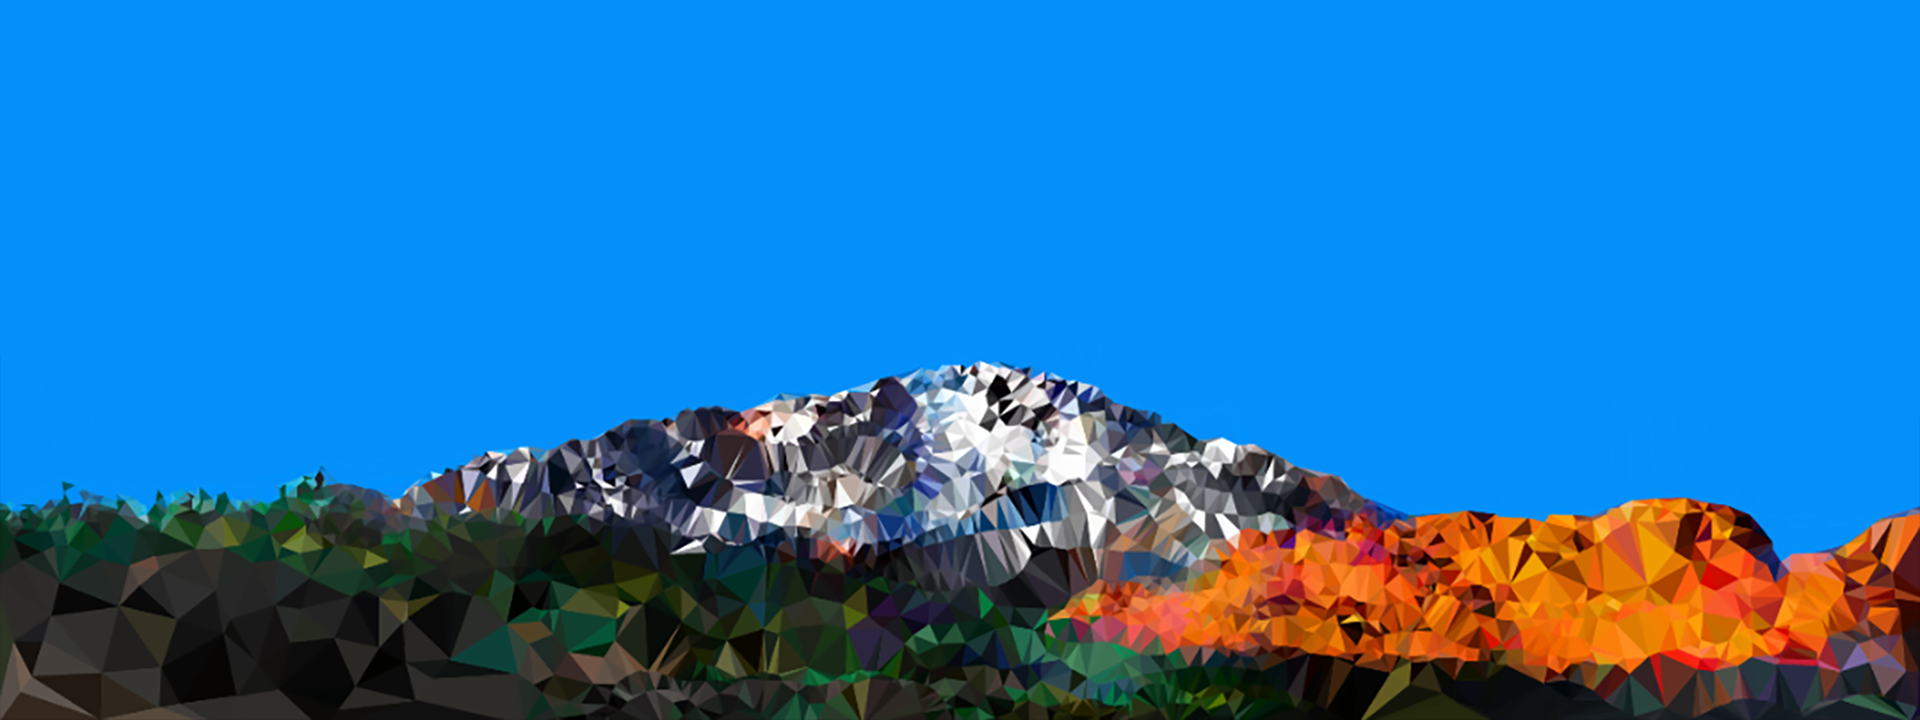 CHI 2017 artwork depicting a pixelated mountain